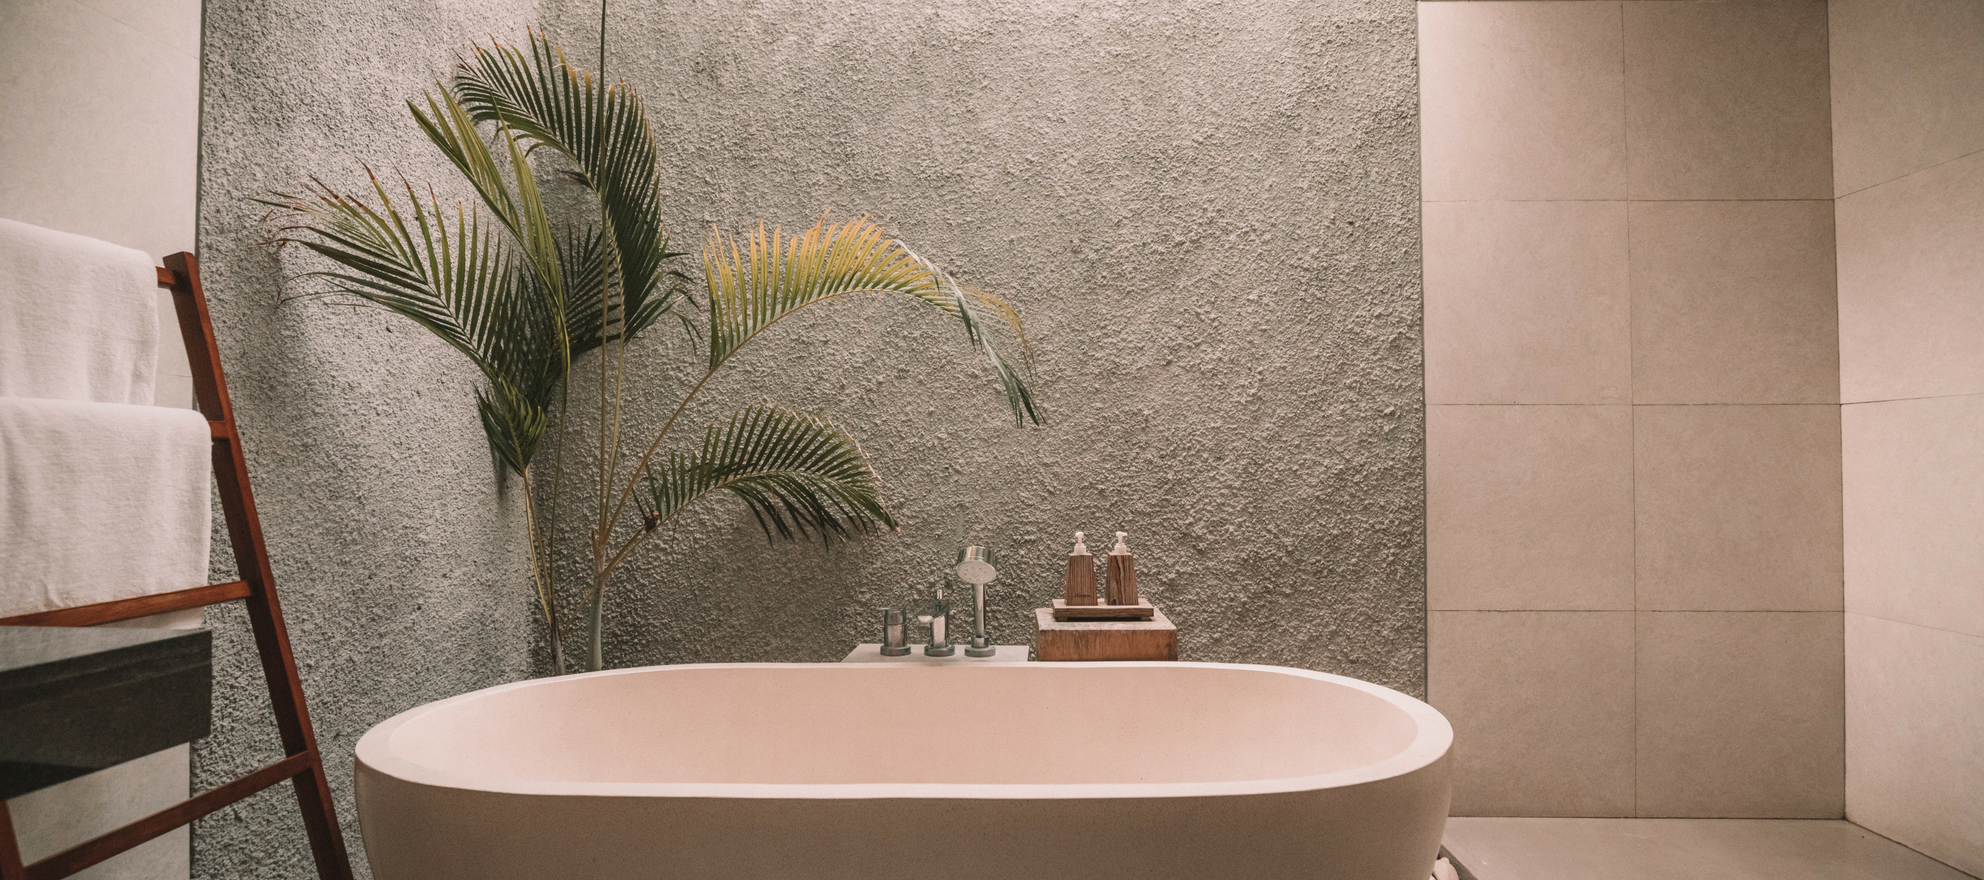 Pros And Cons Of 9 Bathtub Materials, Free Used Bathtubs